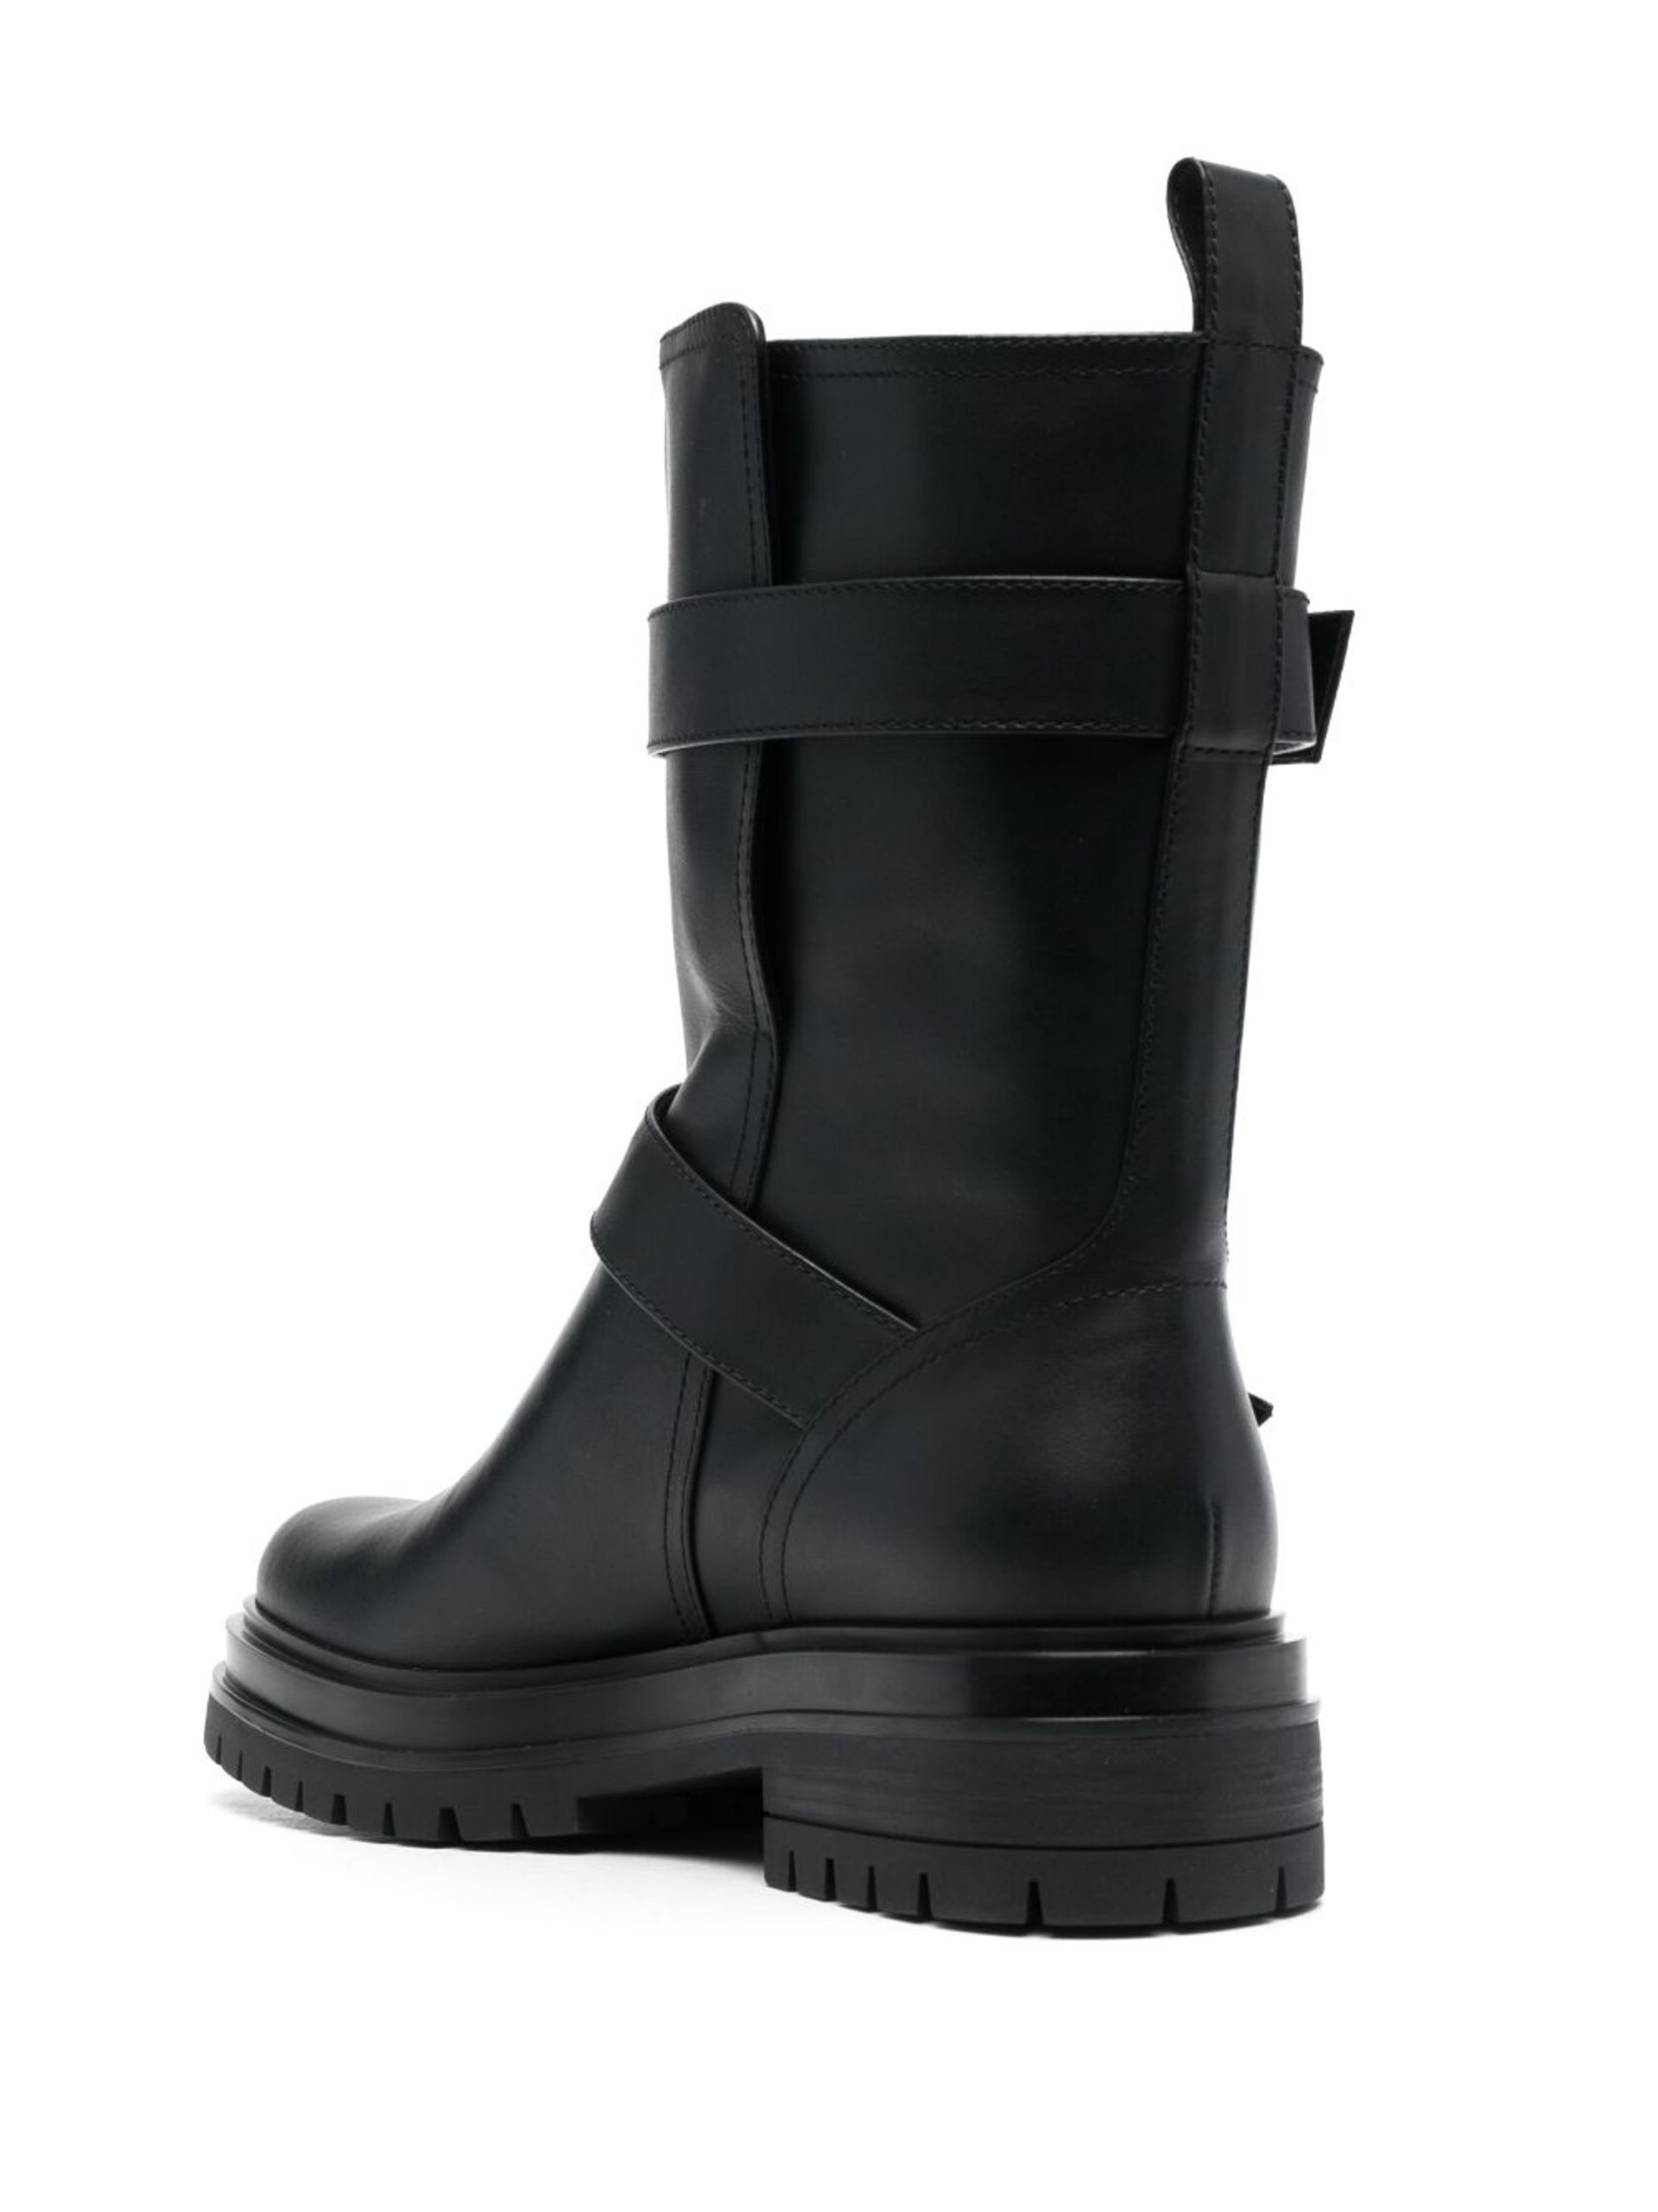 Black Amphibian Buckled Ankle Boots - 3